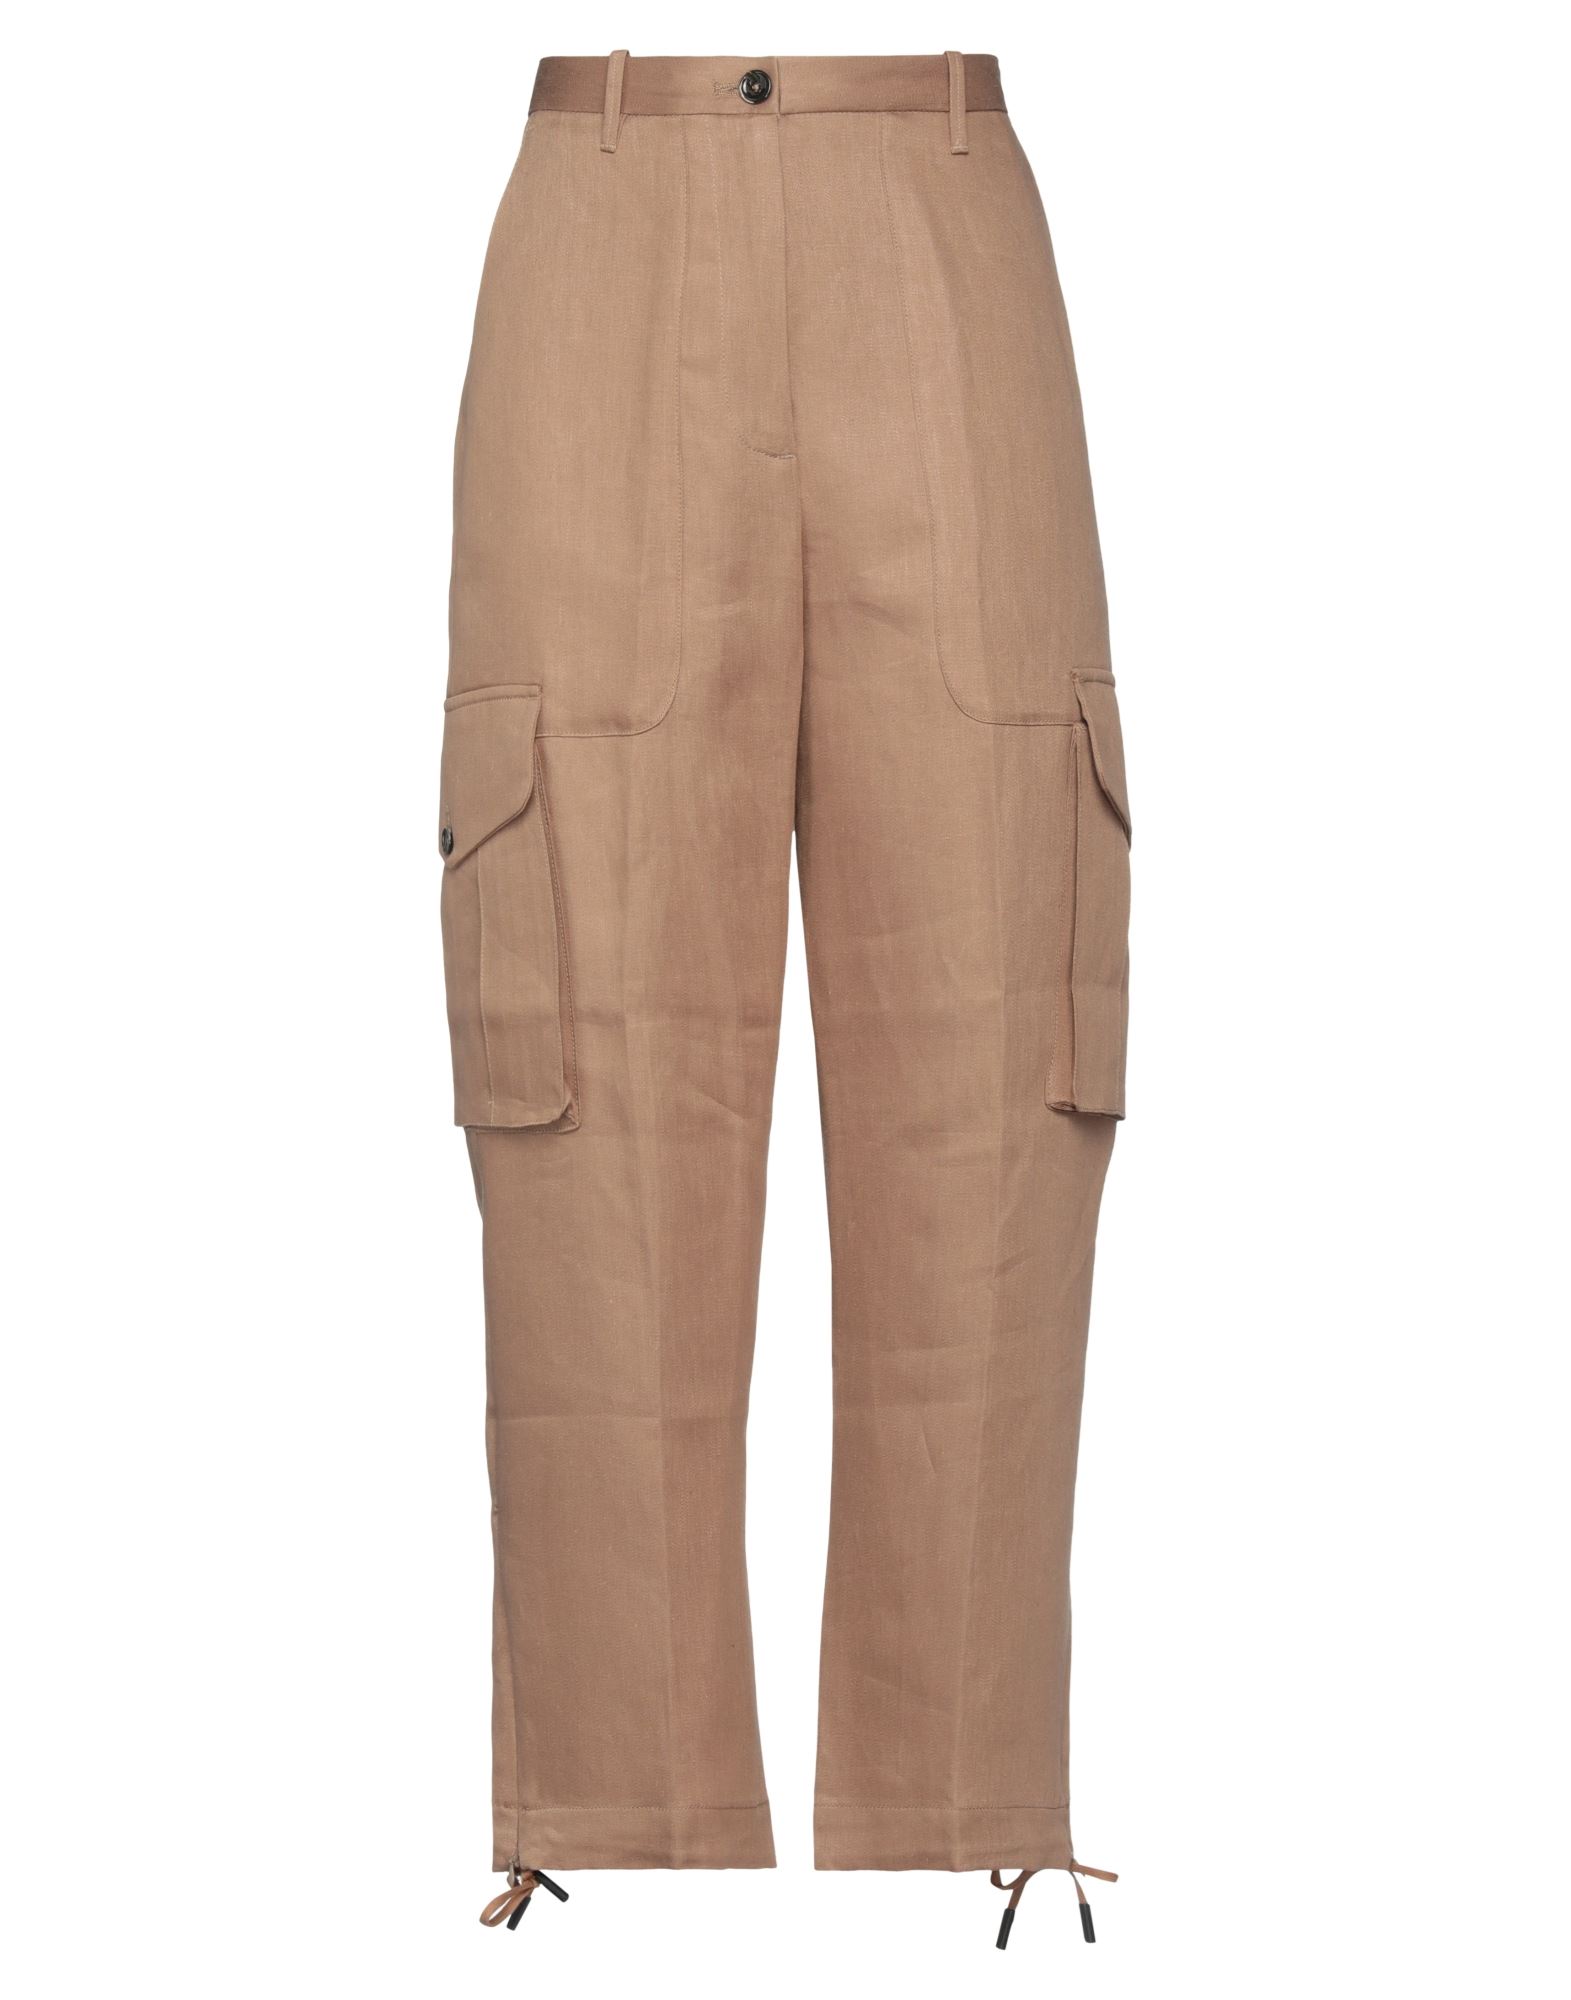 NINE:INTHE:MORNING NINE IN THE MORNING WOMAN PANTS BROWN SIZE 28 LINEN